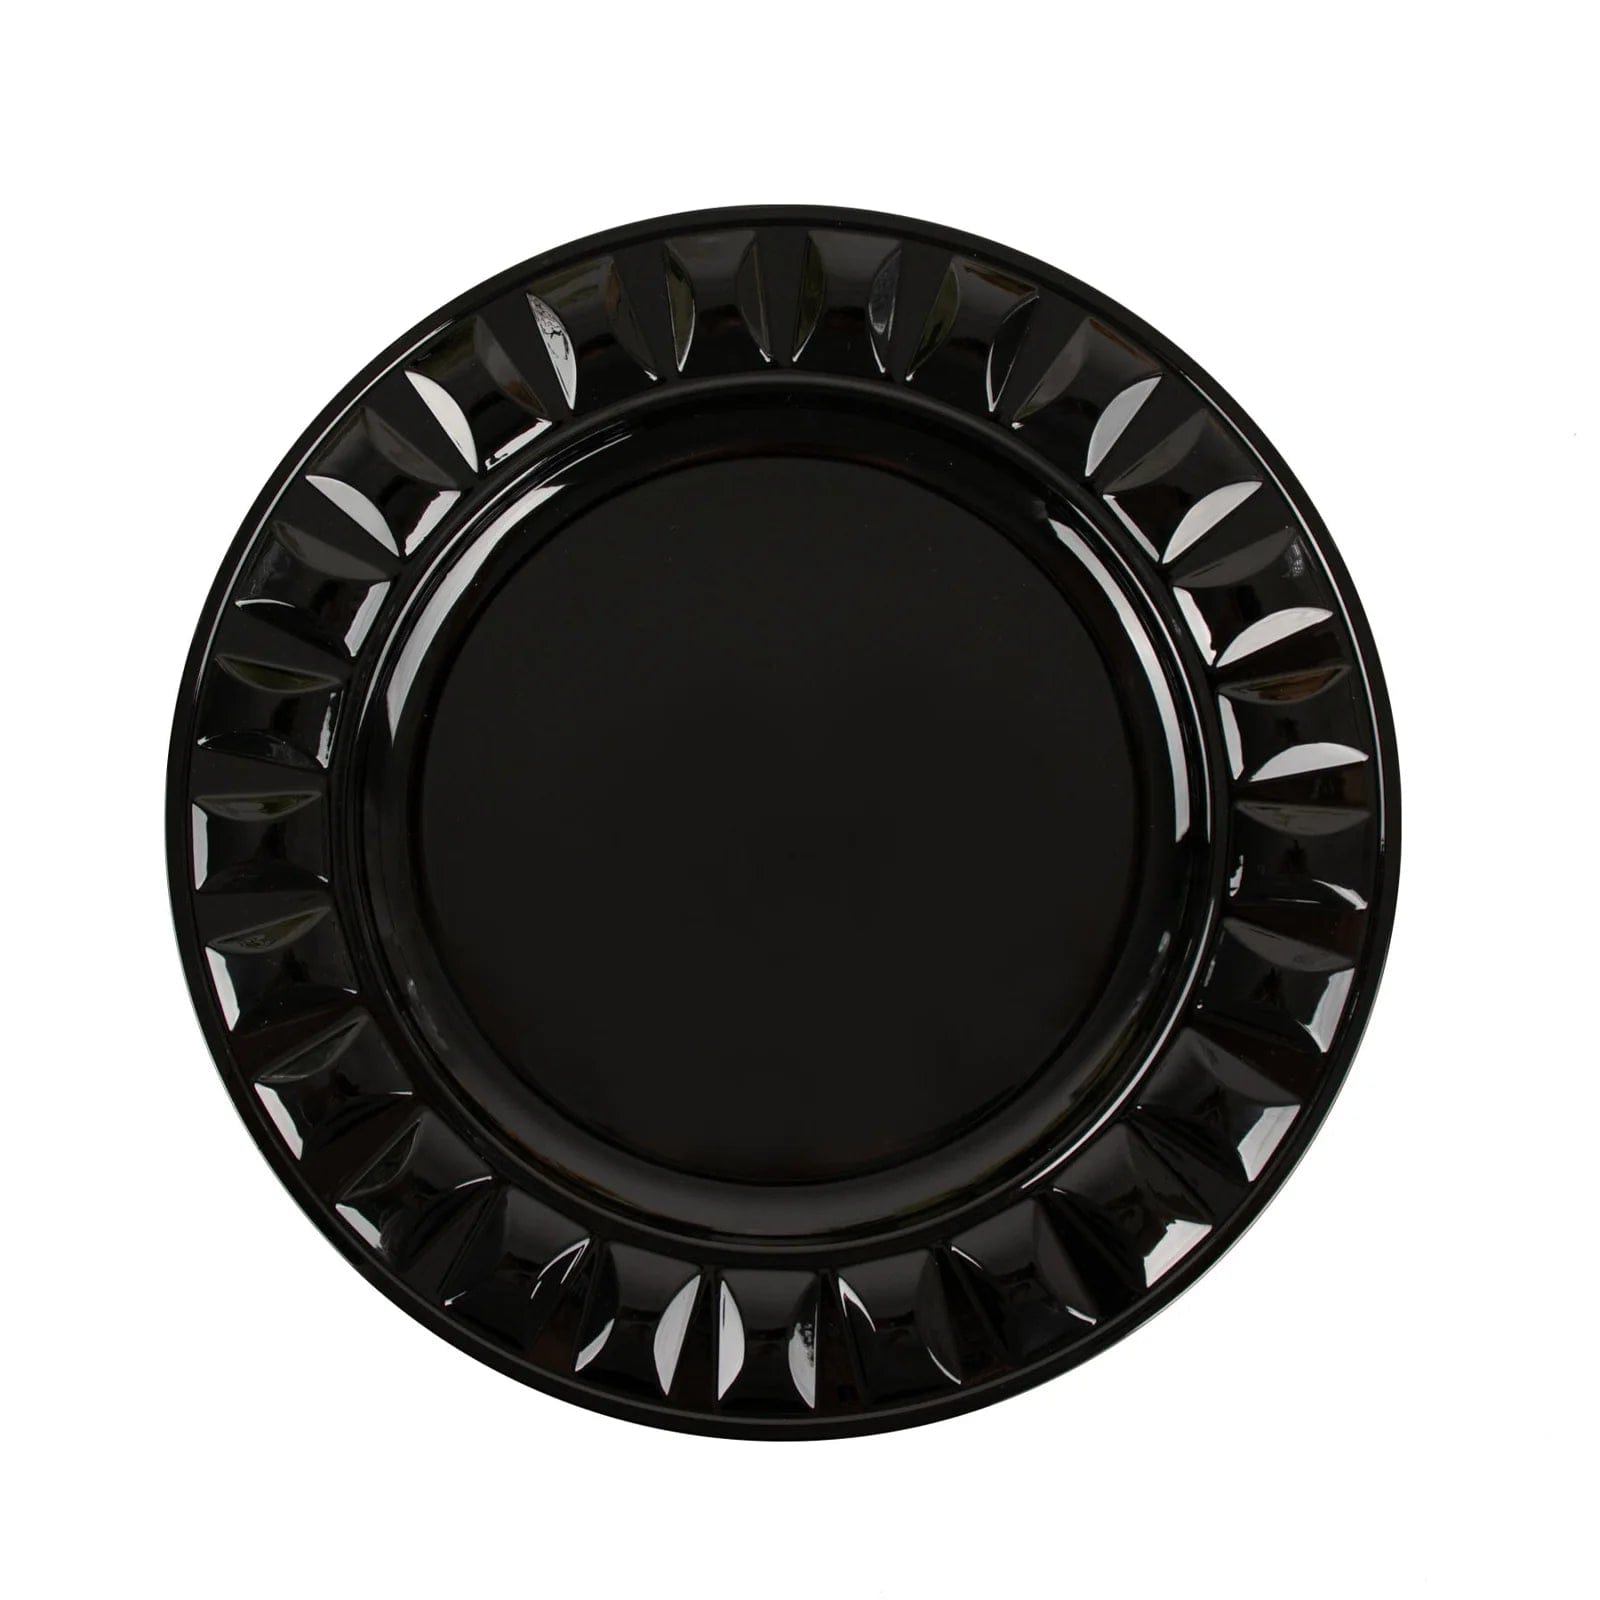 6 Round 13 in Plastic Charger Plates with Bejeweled Trim